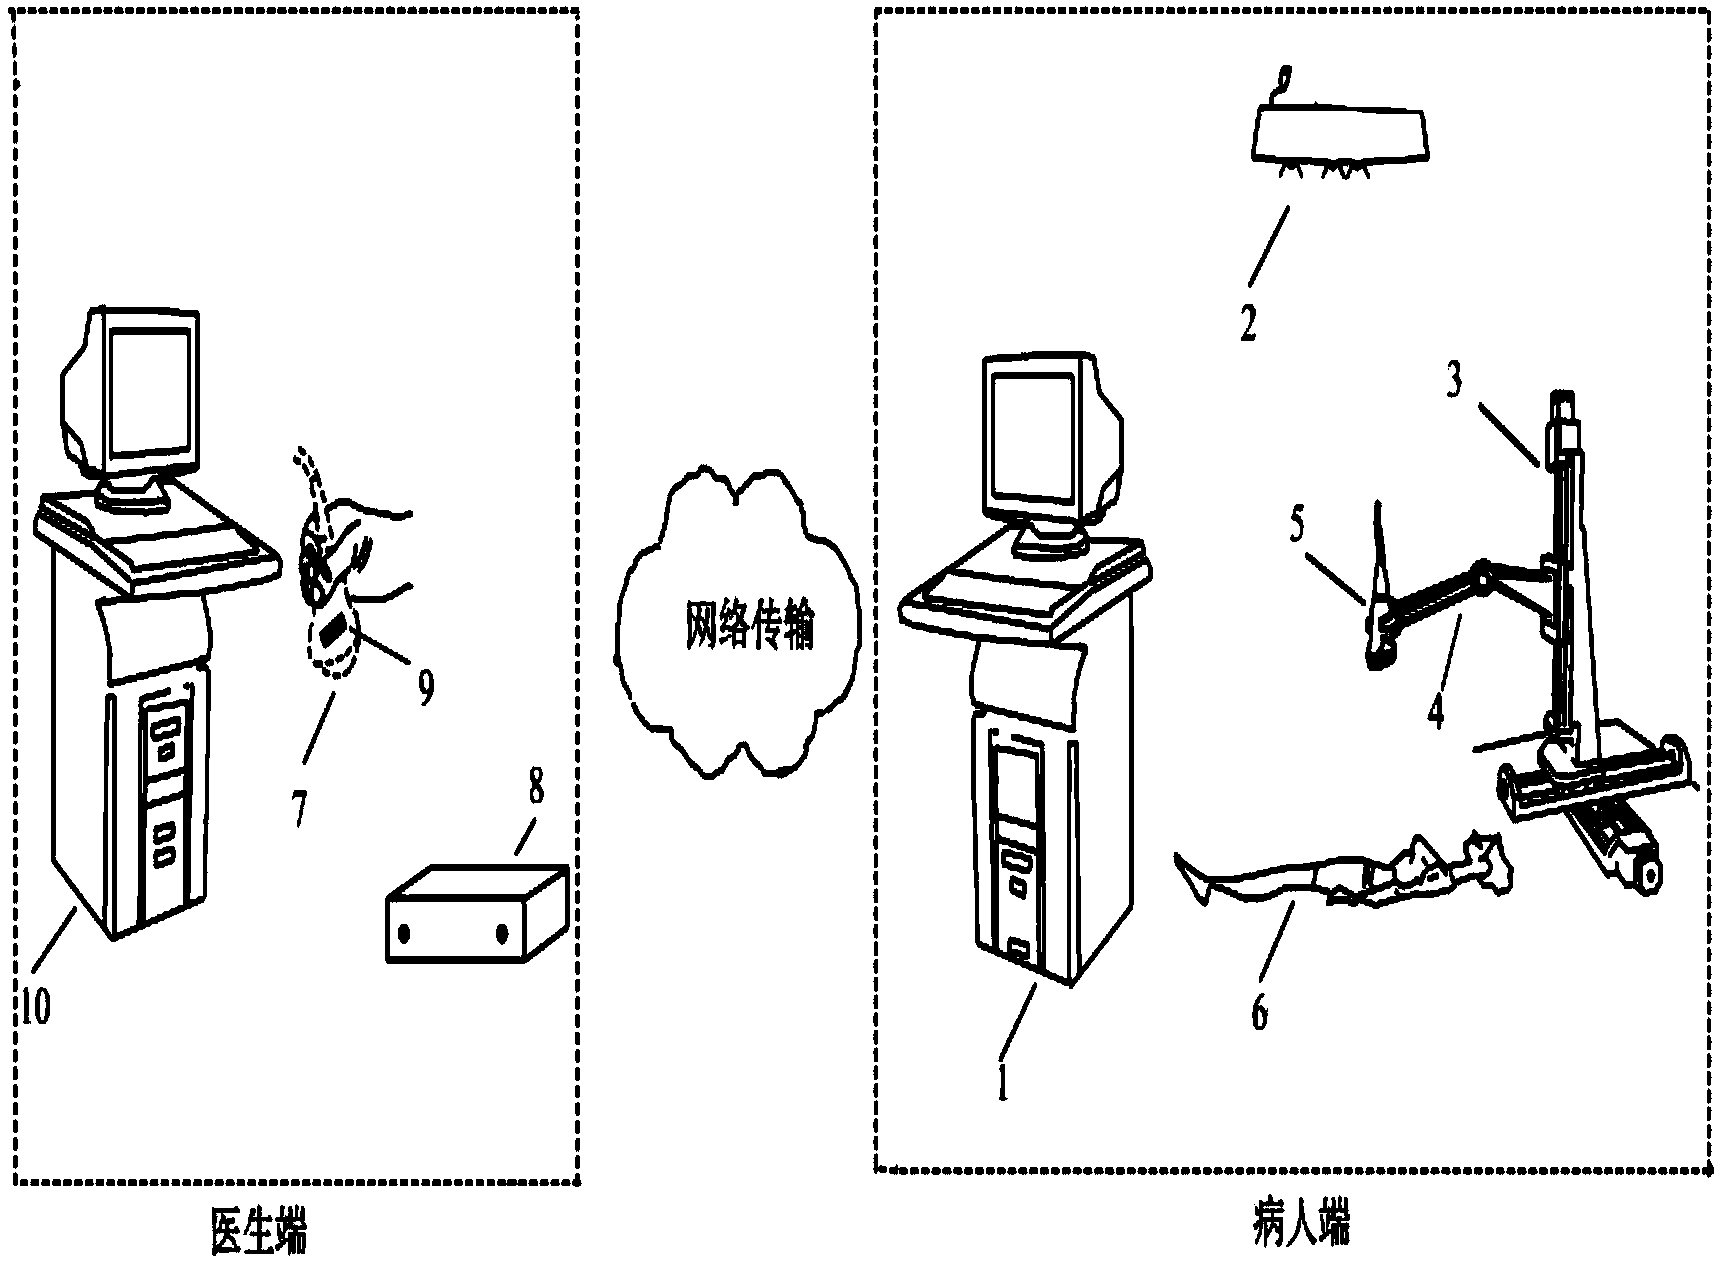 Ultrasonic probe scanning system and method for remote control